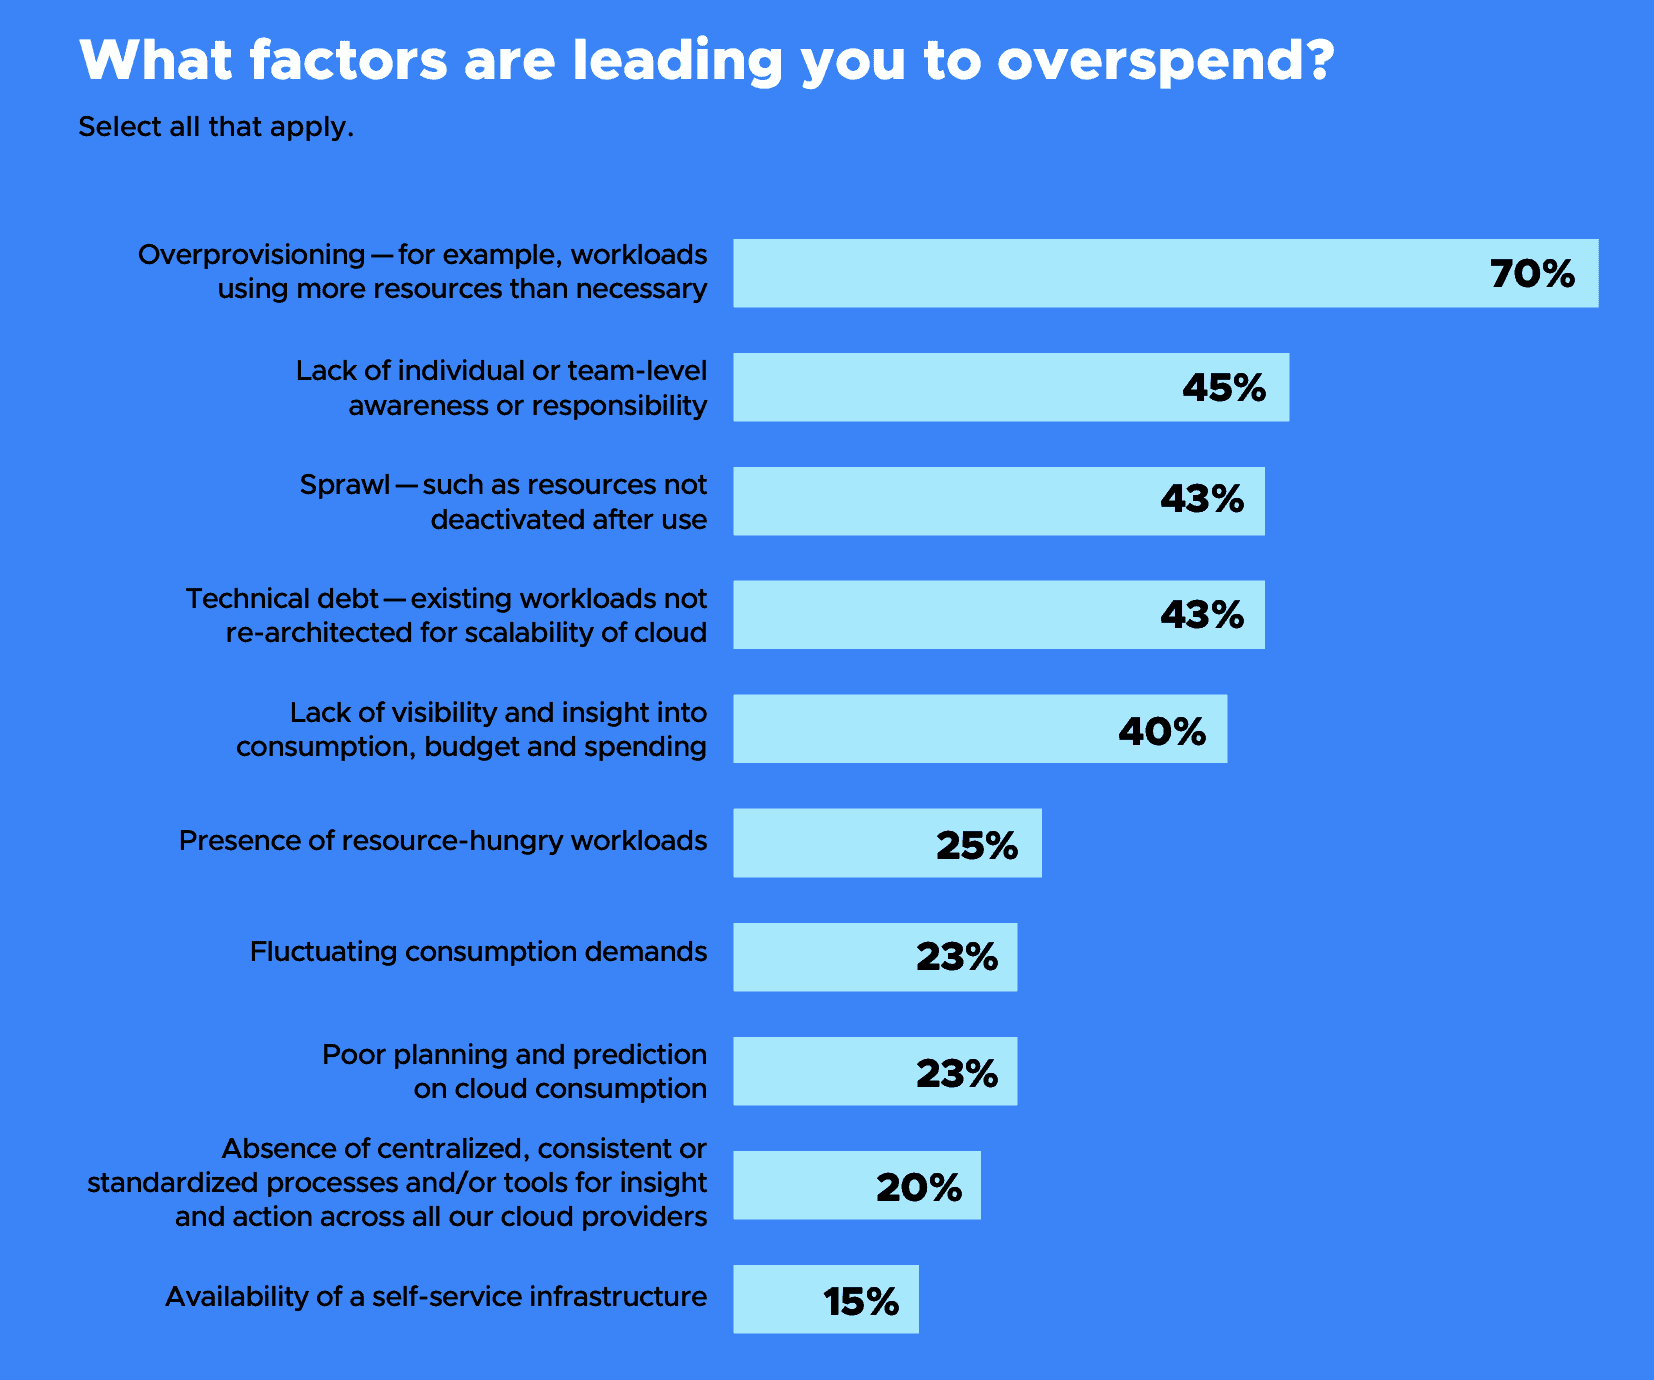 Bar chart showing respondent's answers for "What factors are leading you to overspend?" 70% chose overprovisioning - for example, workloads using more resources than necessary